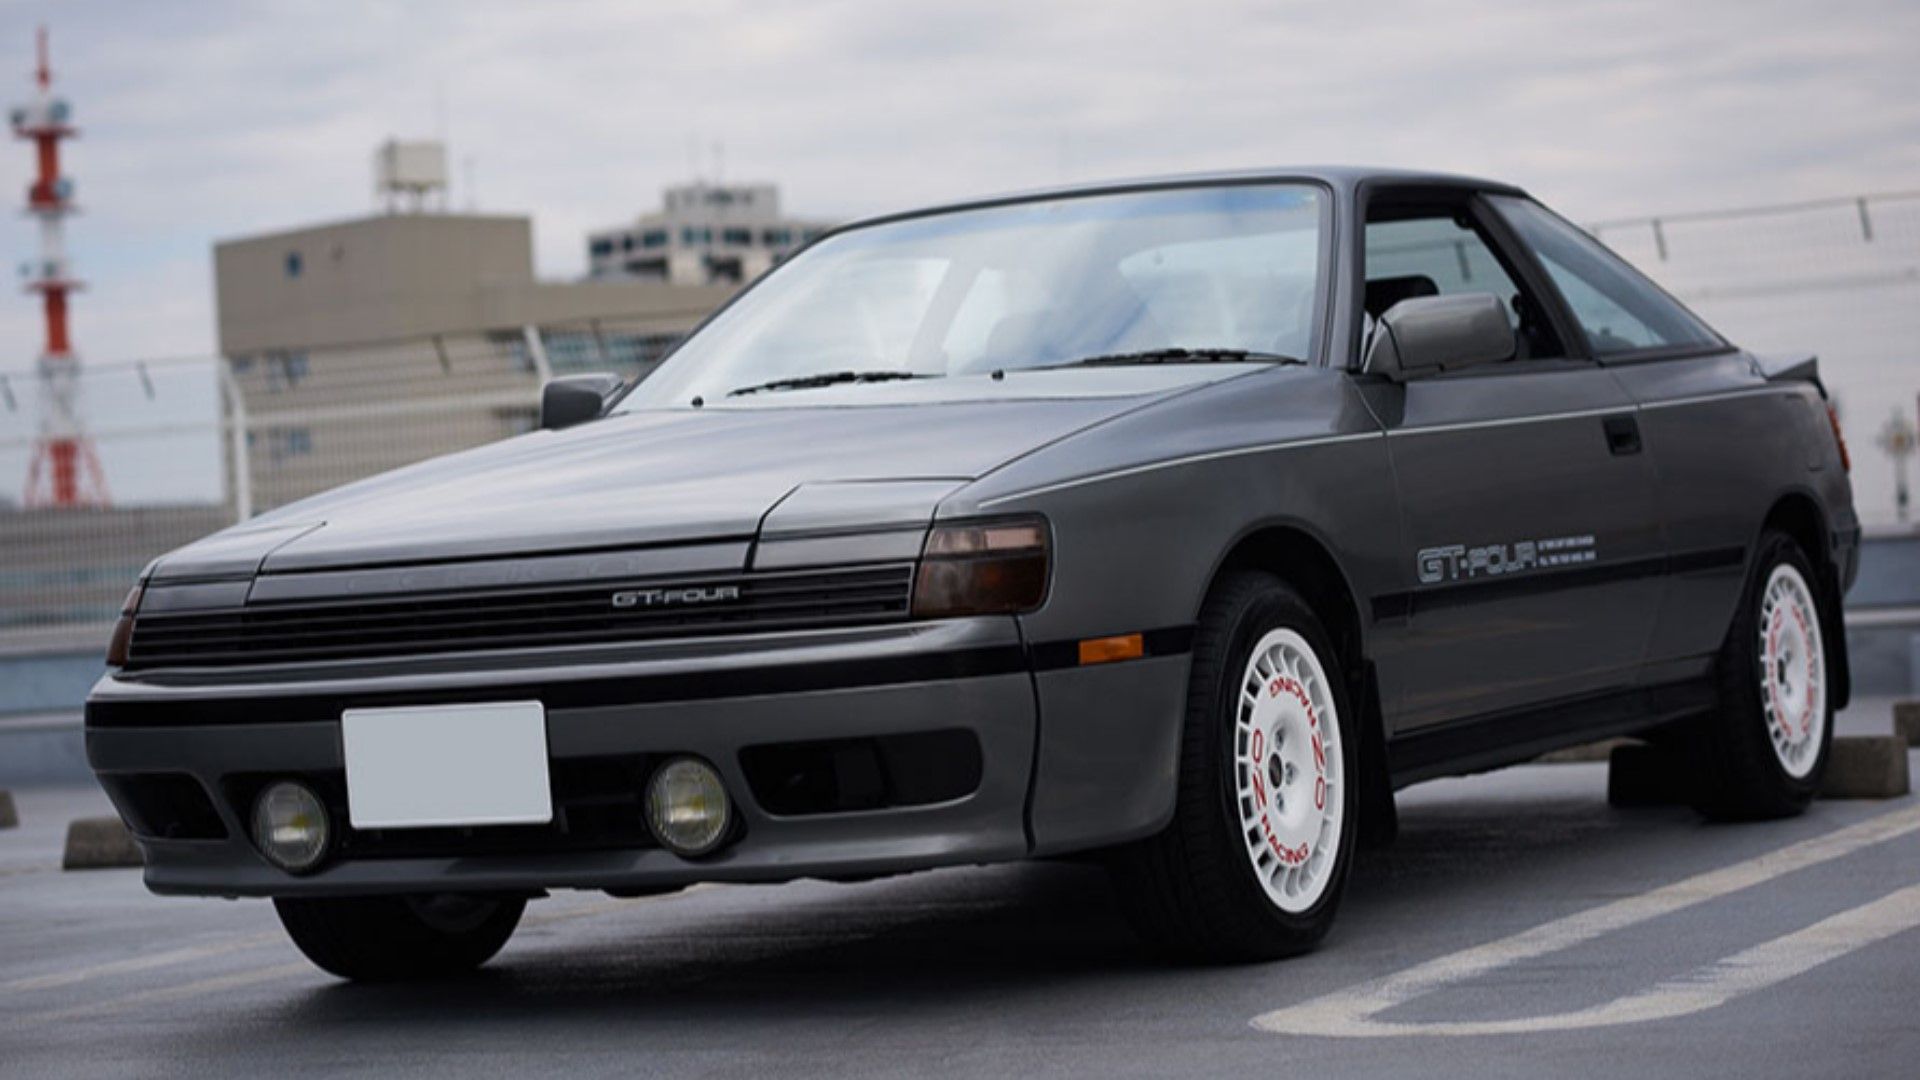 Front 3/4 shot of a 1986 Toyota Celica GT-Four